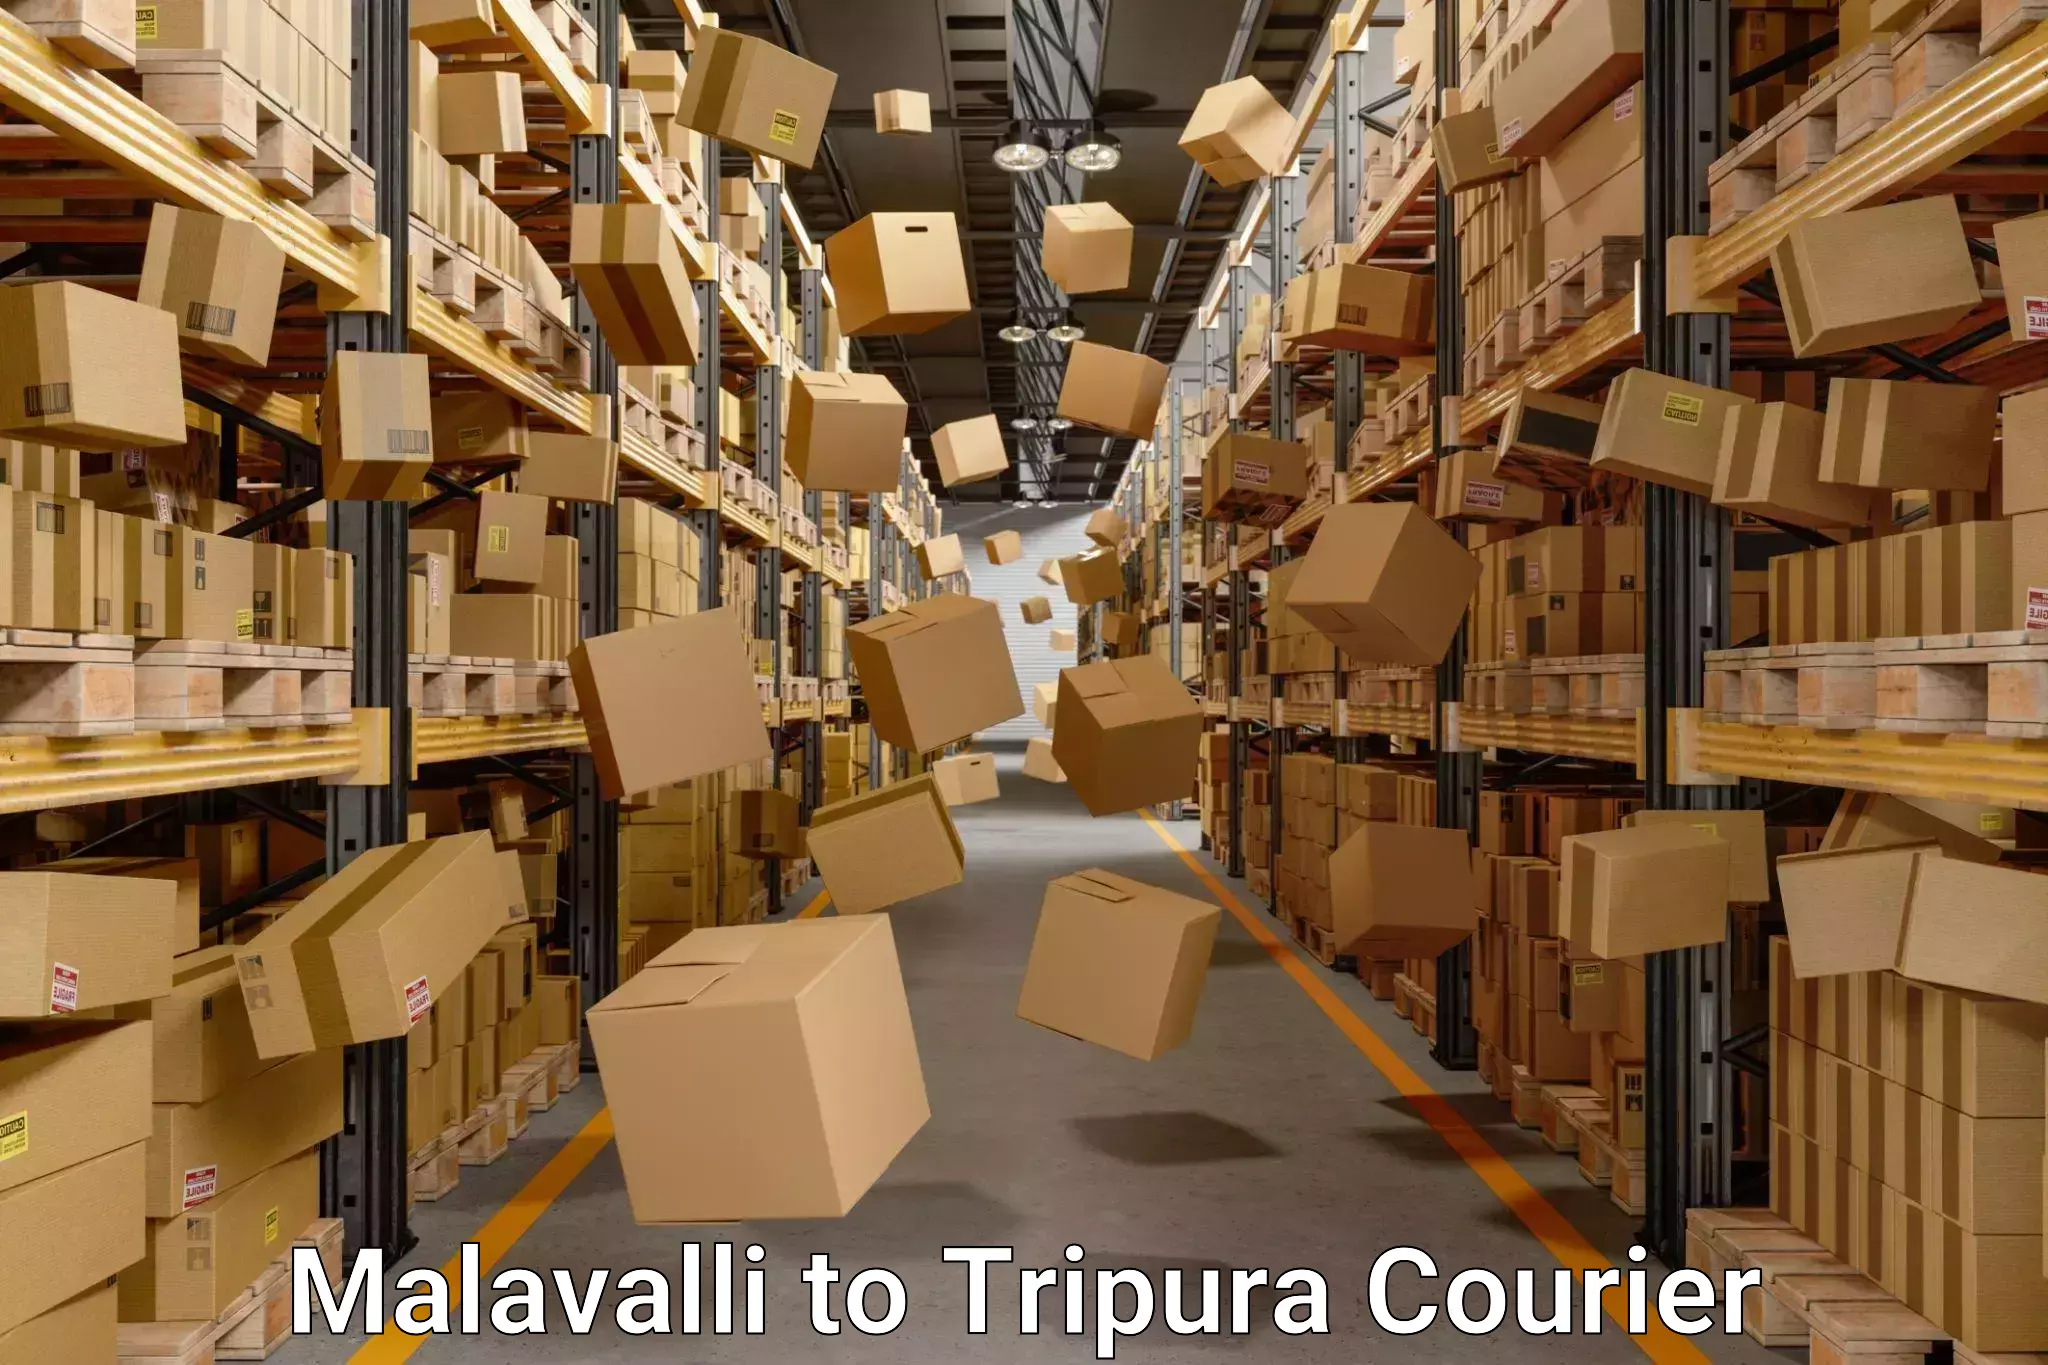 Moving and storage services Malavalli to Udaipur Tripura